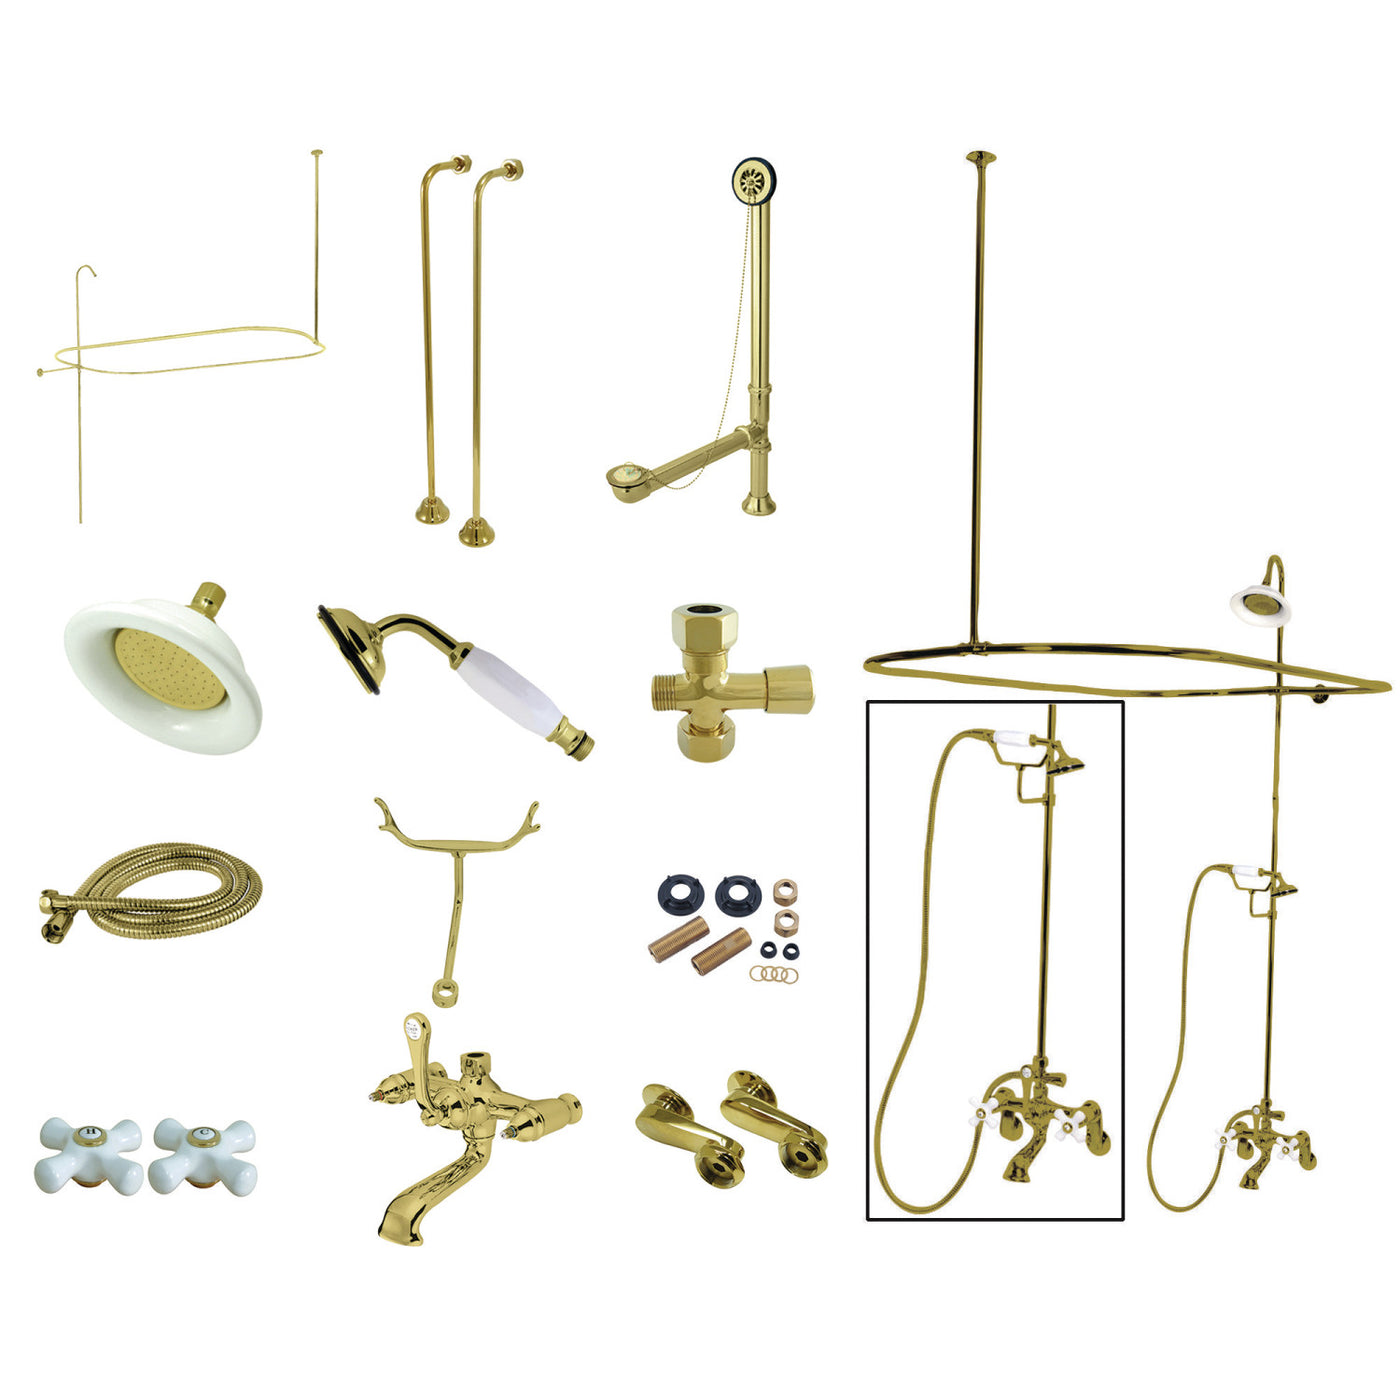 Elements of Design EDK1142PX Clawfoot Tub Faucet Package with Shower Enclosure, Polished Brass